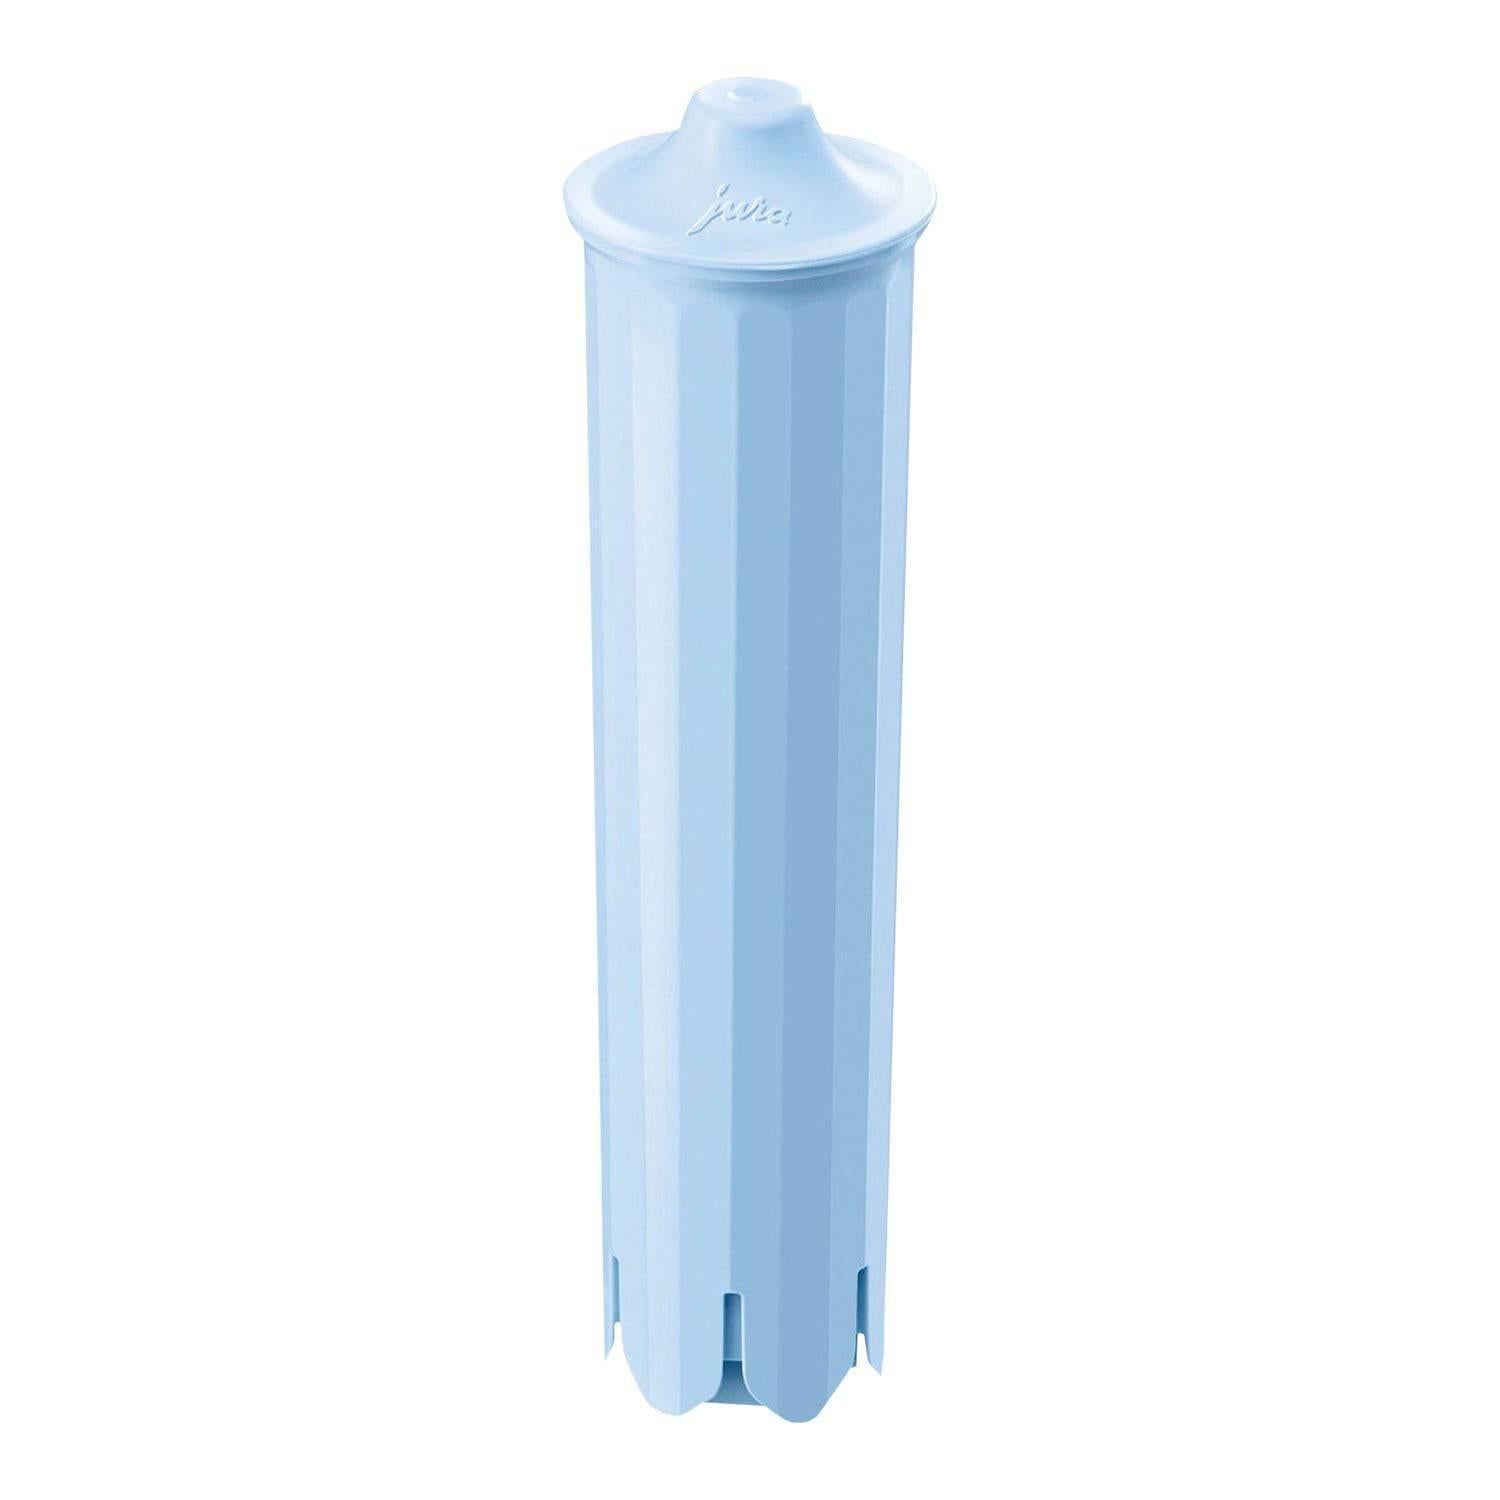 Jura CLARIS Blue Water Filter Cartridge - New Protective Formula - Pack of 3 - Healthxpress.ie